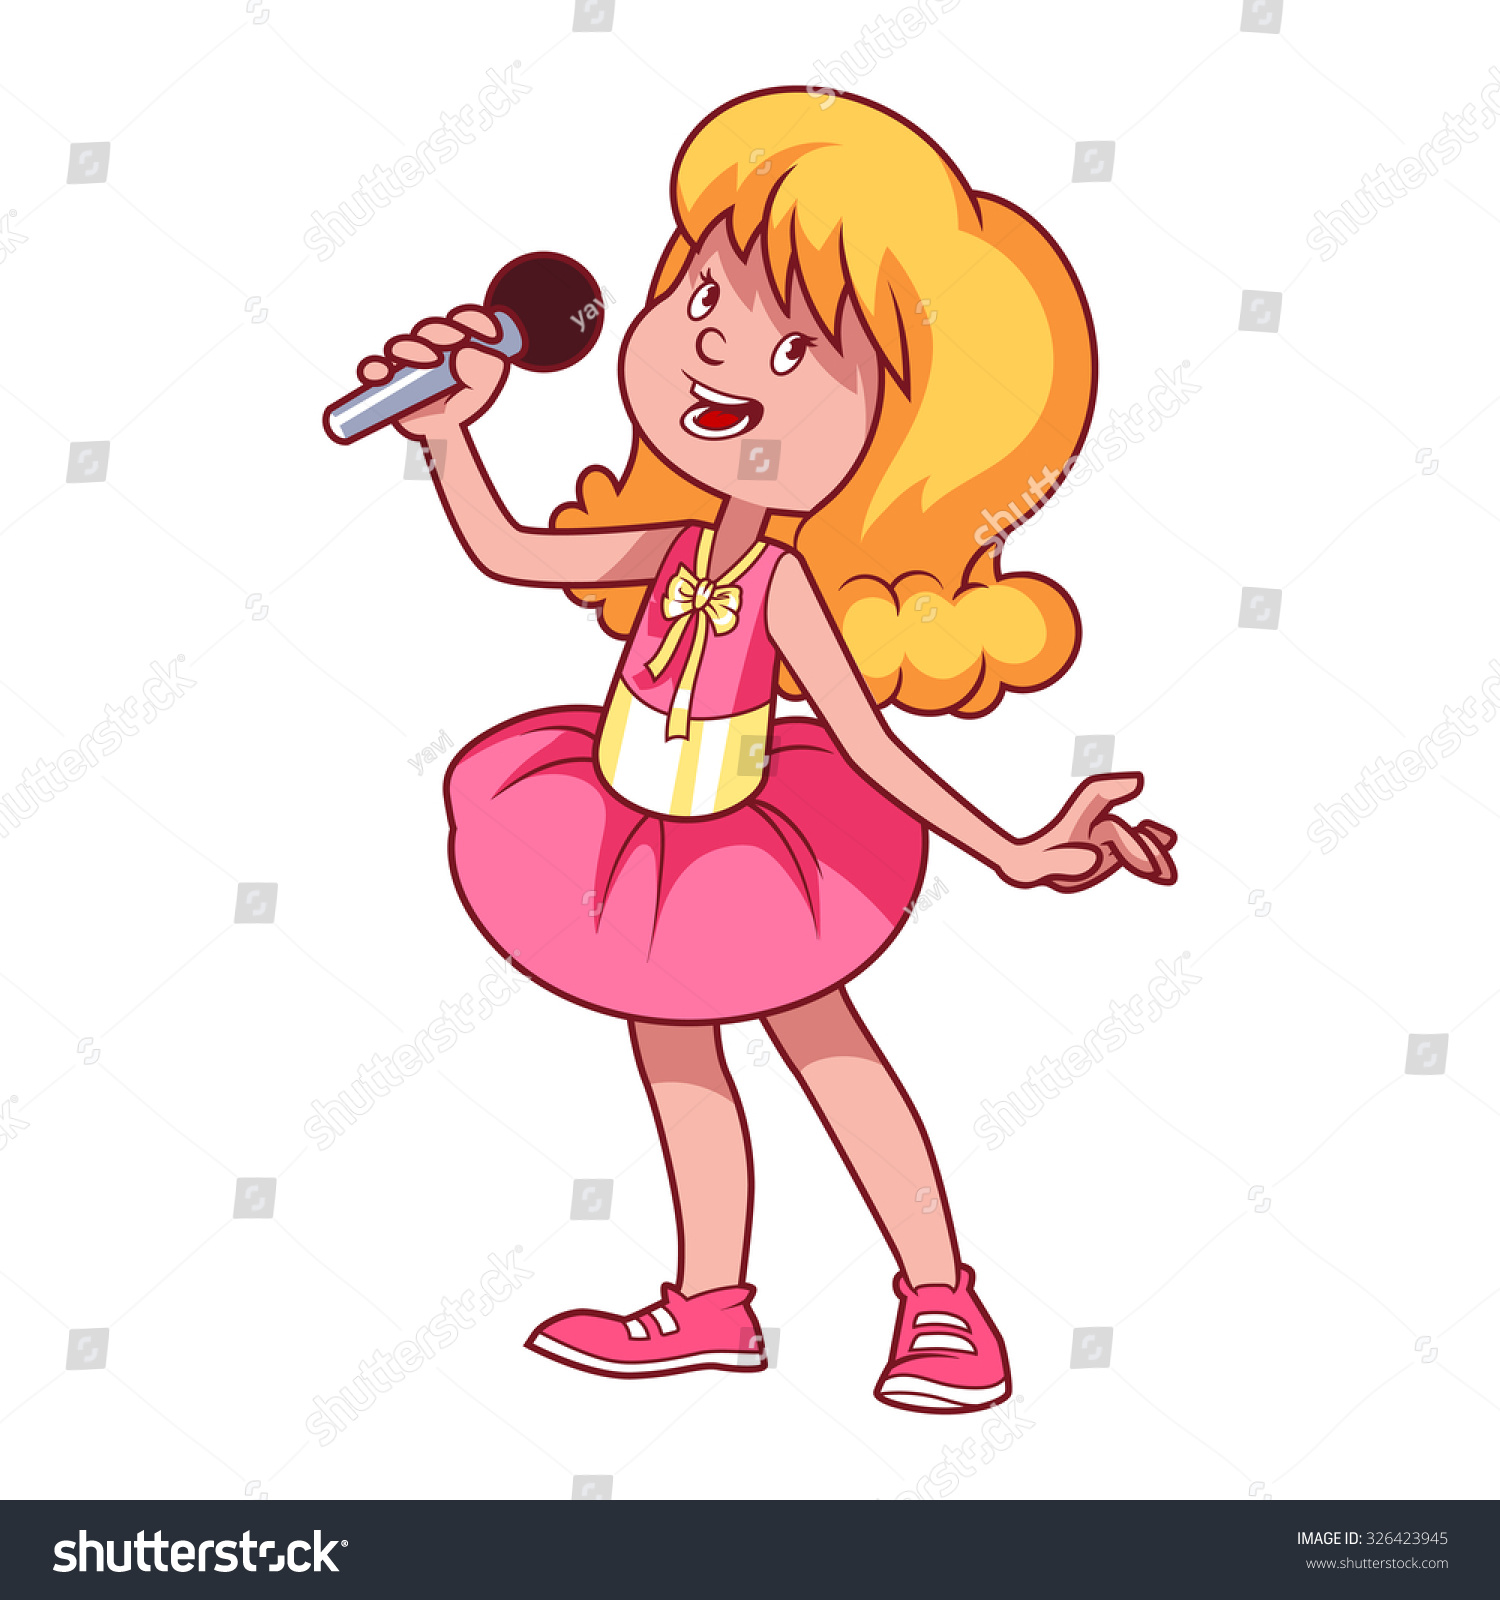 clipart of a girl singing - photo #35